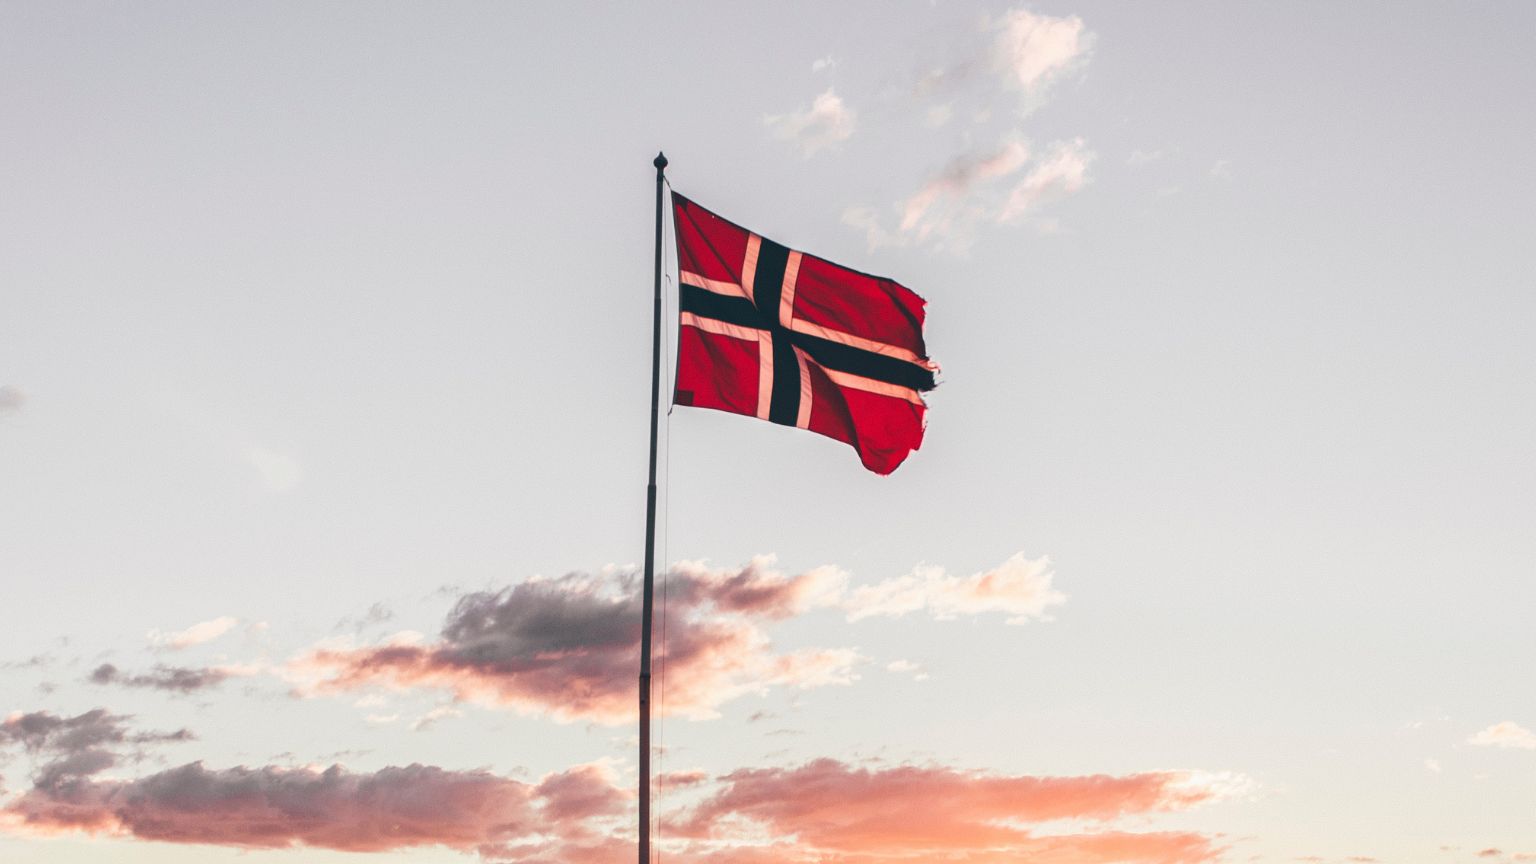 Norway pushes ahead with digital currency, ignoring privacy concerns